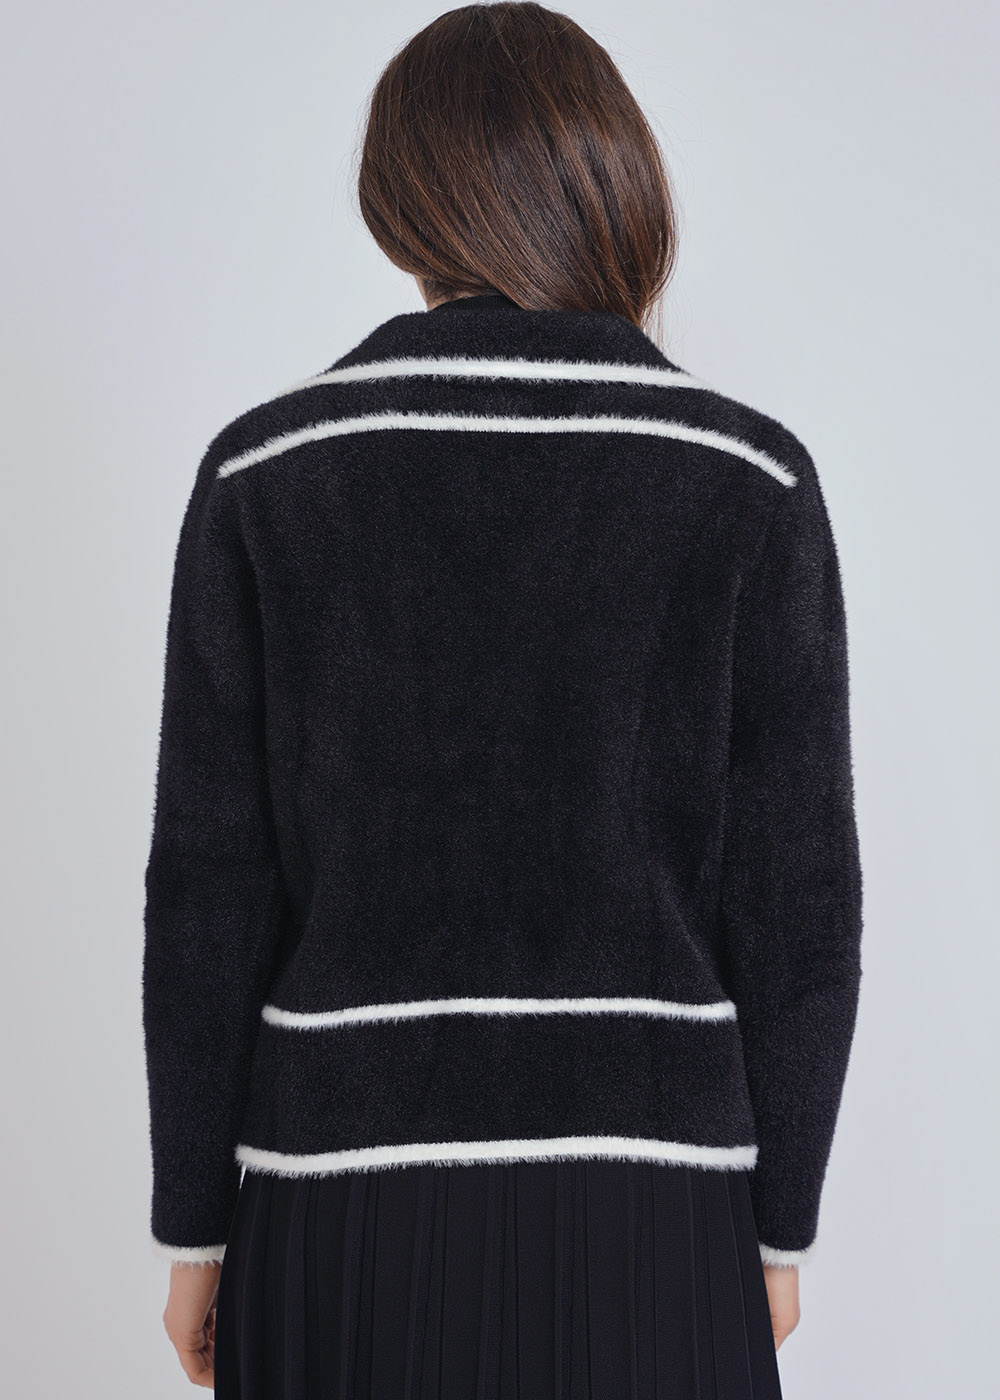 Black & White Cardigan Fusion: Warm Furry Knit with Formal Lapel